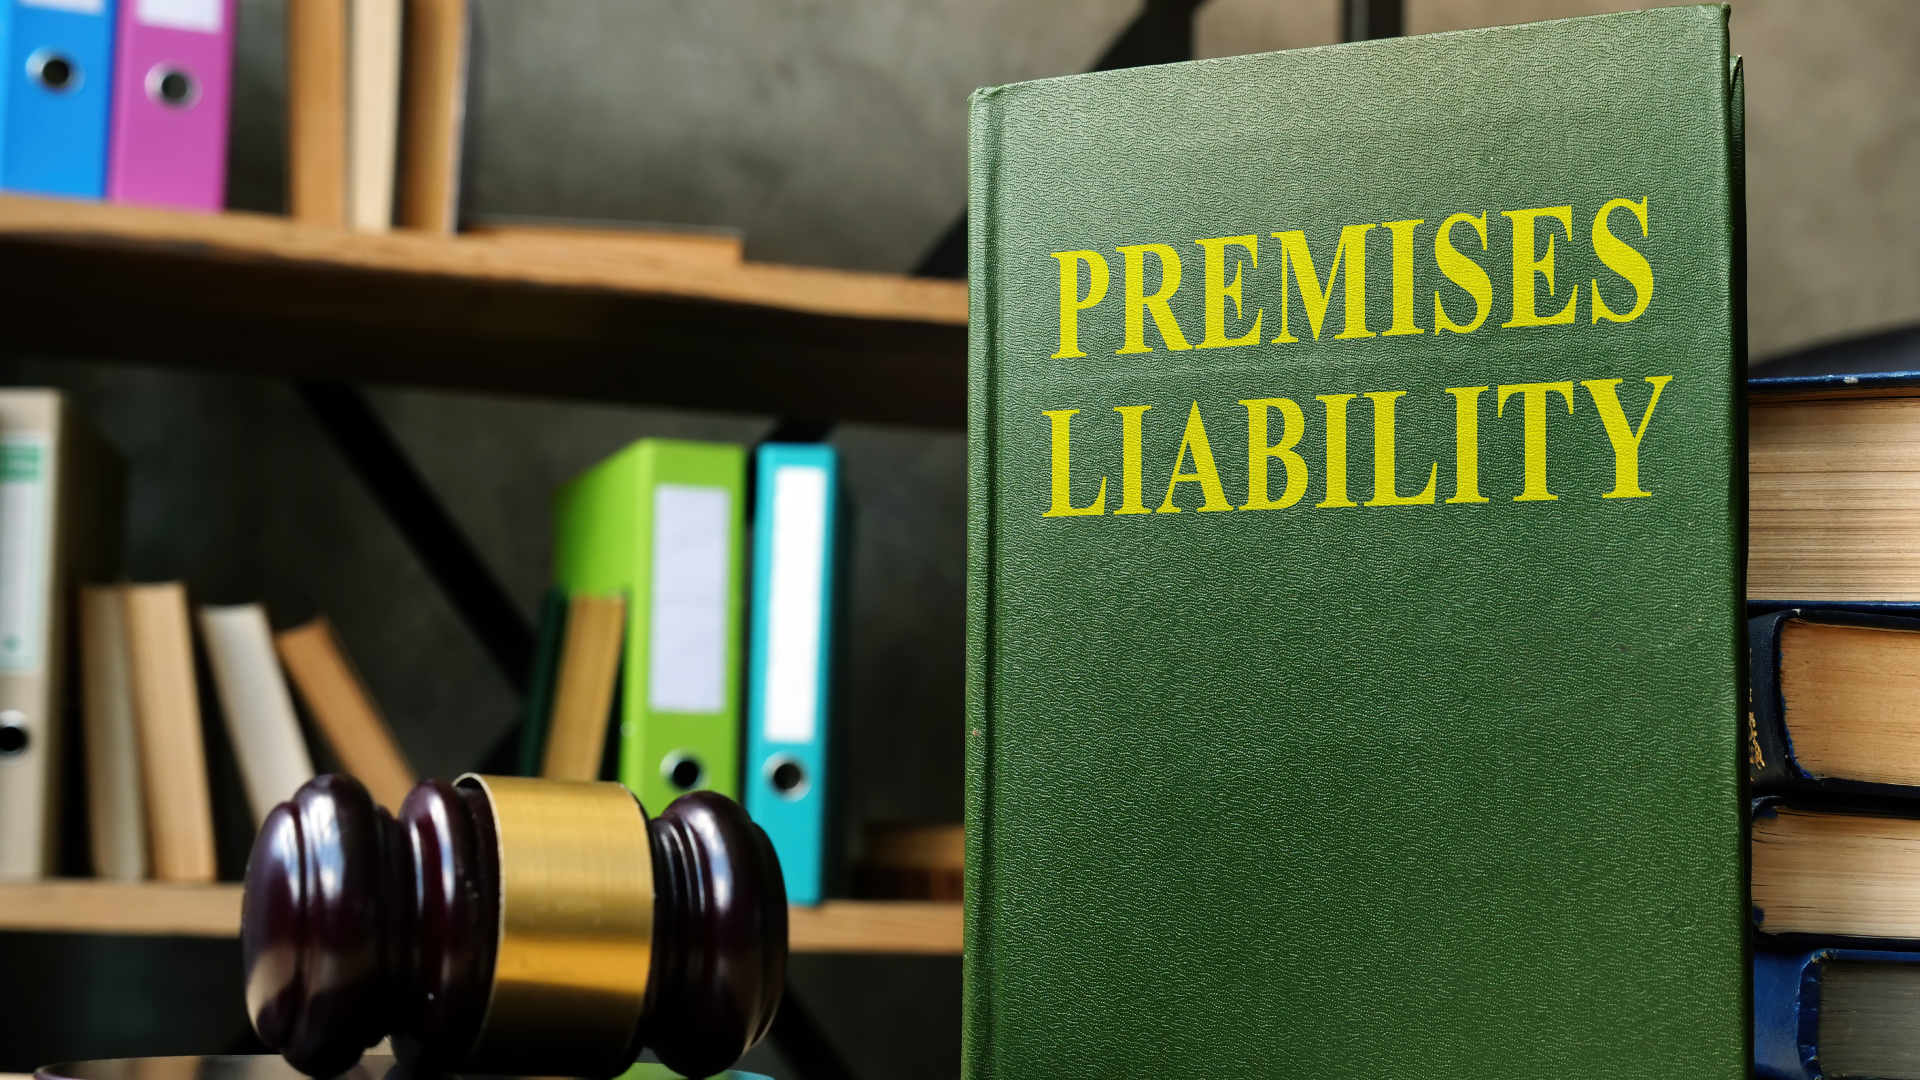 A premises liability book on display by a gavel in a library